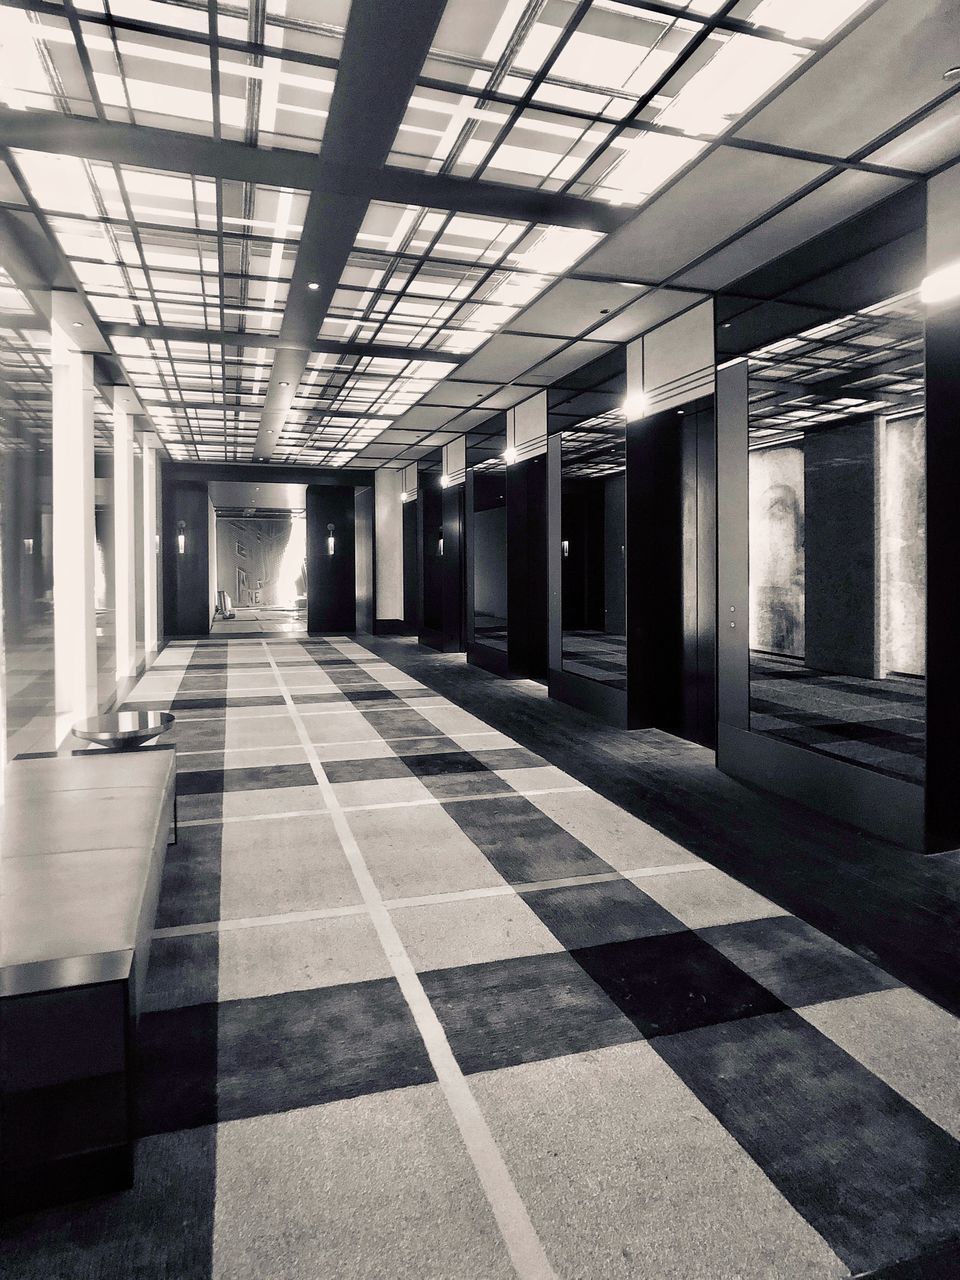 architecture, indoors, built structure, no people, flooring, ceiling, architectural column, empty, building, absence, tiled floor, entrance, tile, checked pattern, door, lighting equipment, day, illuminated, arcade